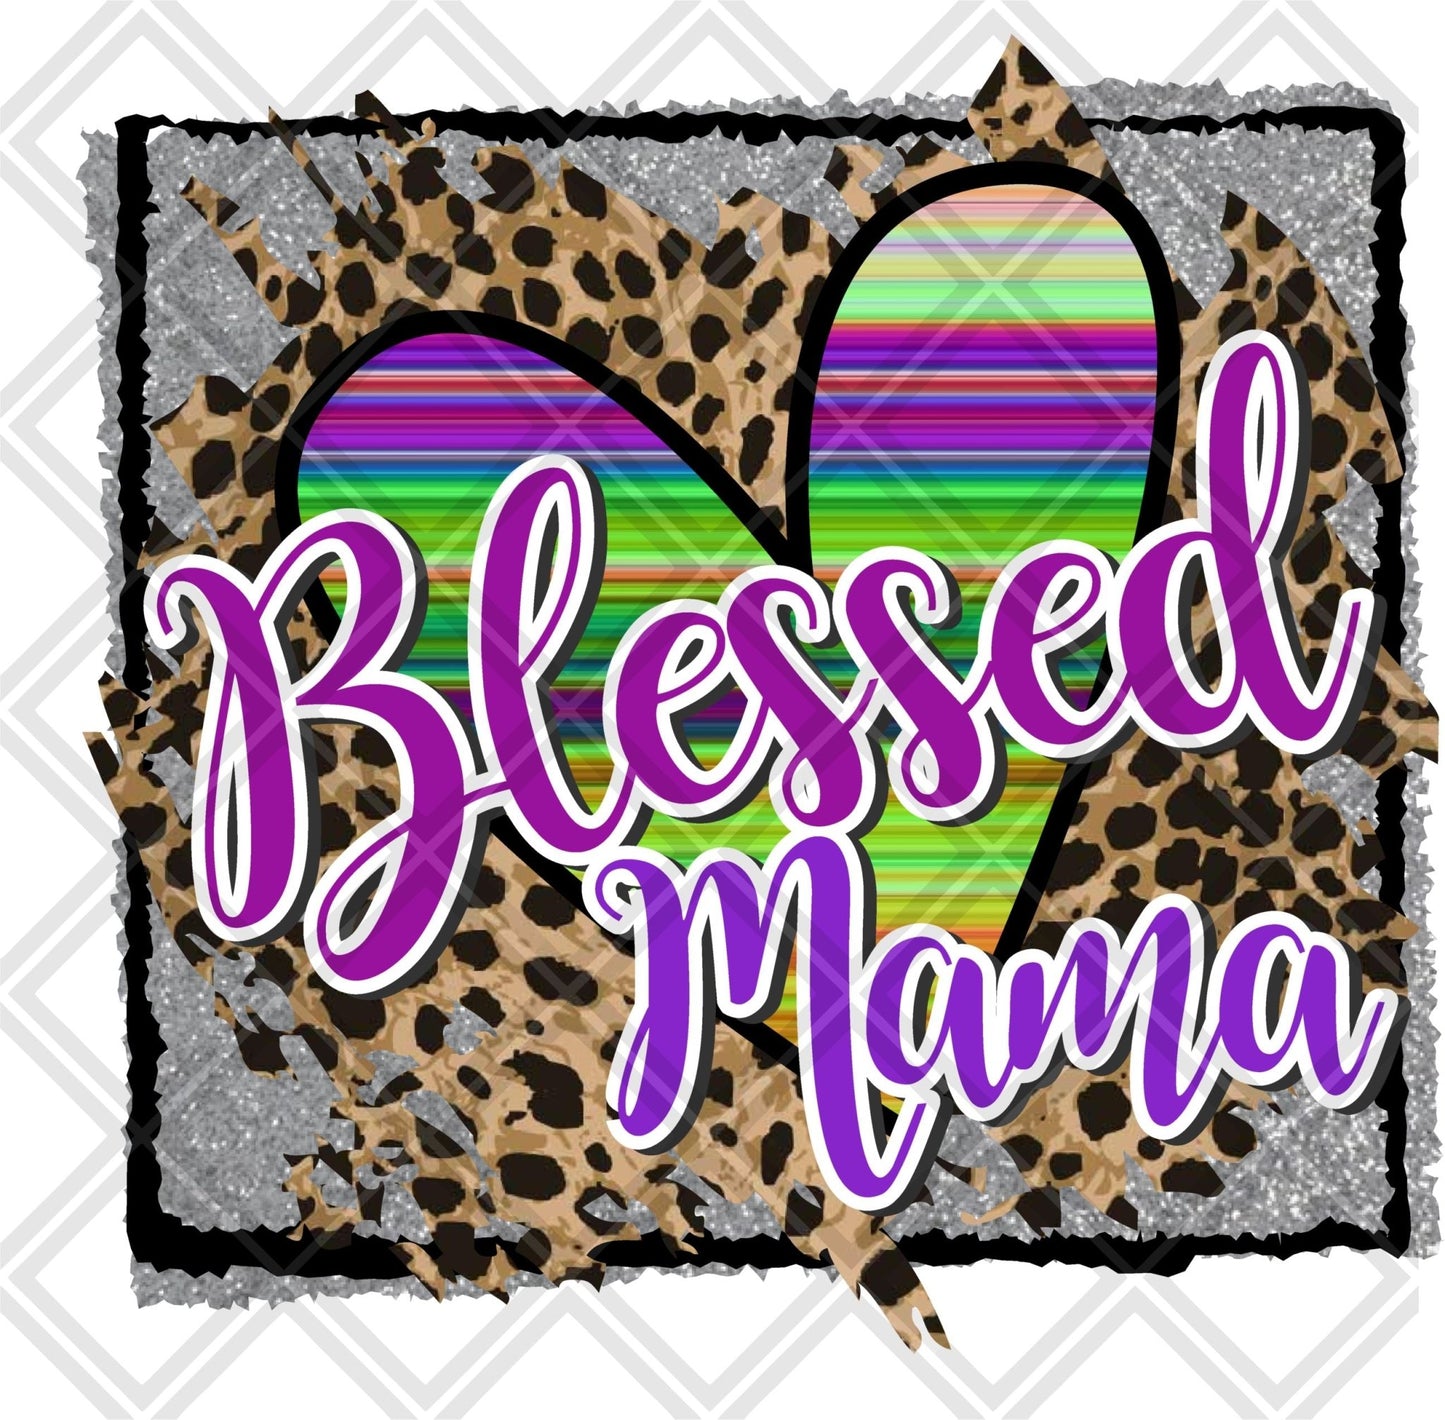 Blessed mama frame DTF TRANSFERPRINT TO ORDER - Do it yourself Transfers